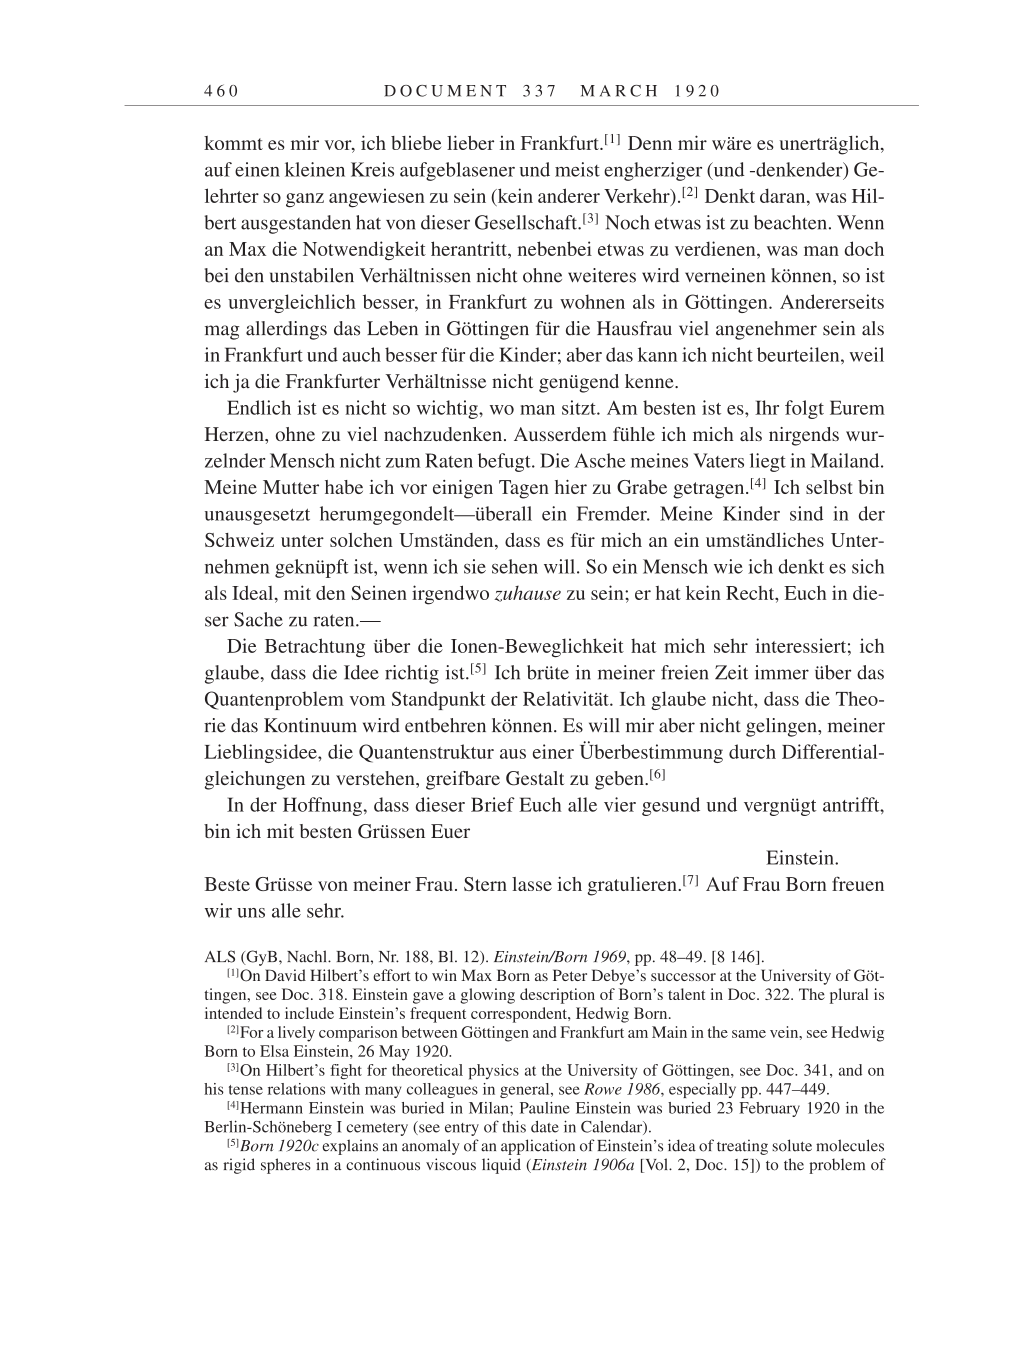 Volume 9: The Berlin Years: Correspondence January 1919-April 1920 page 460